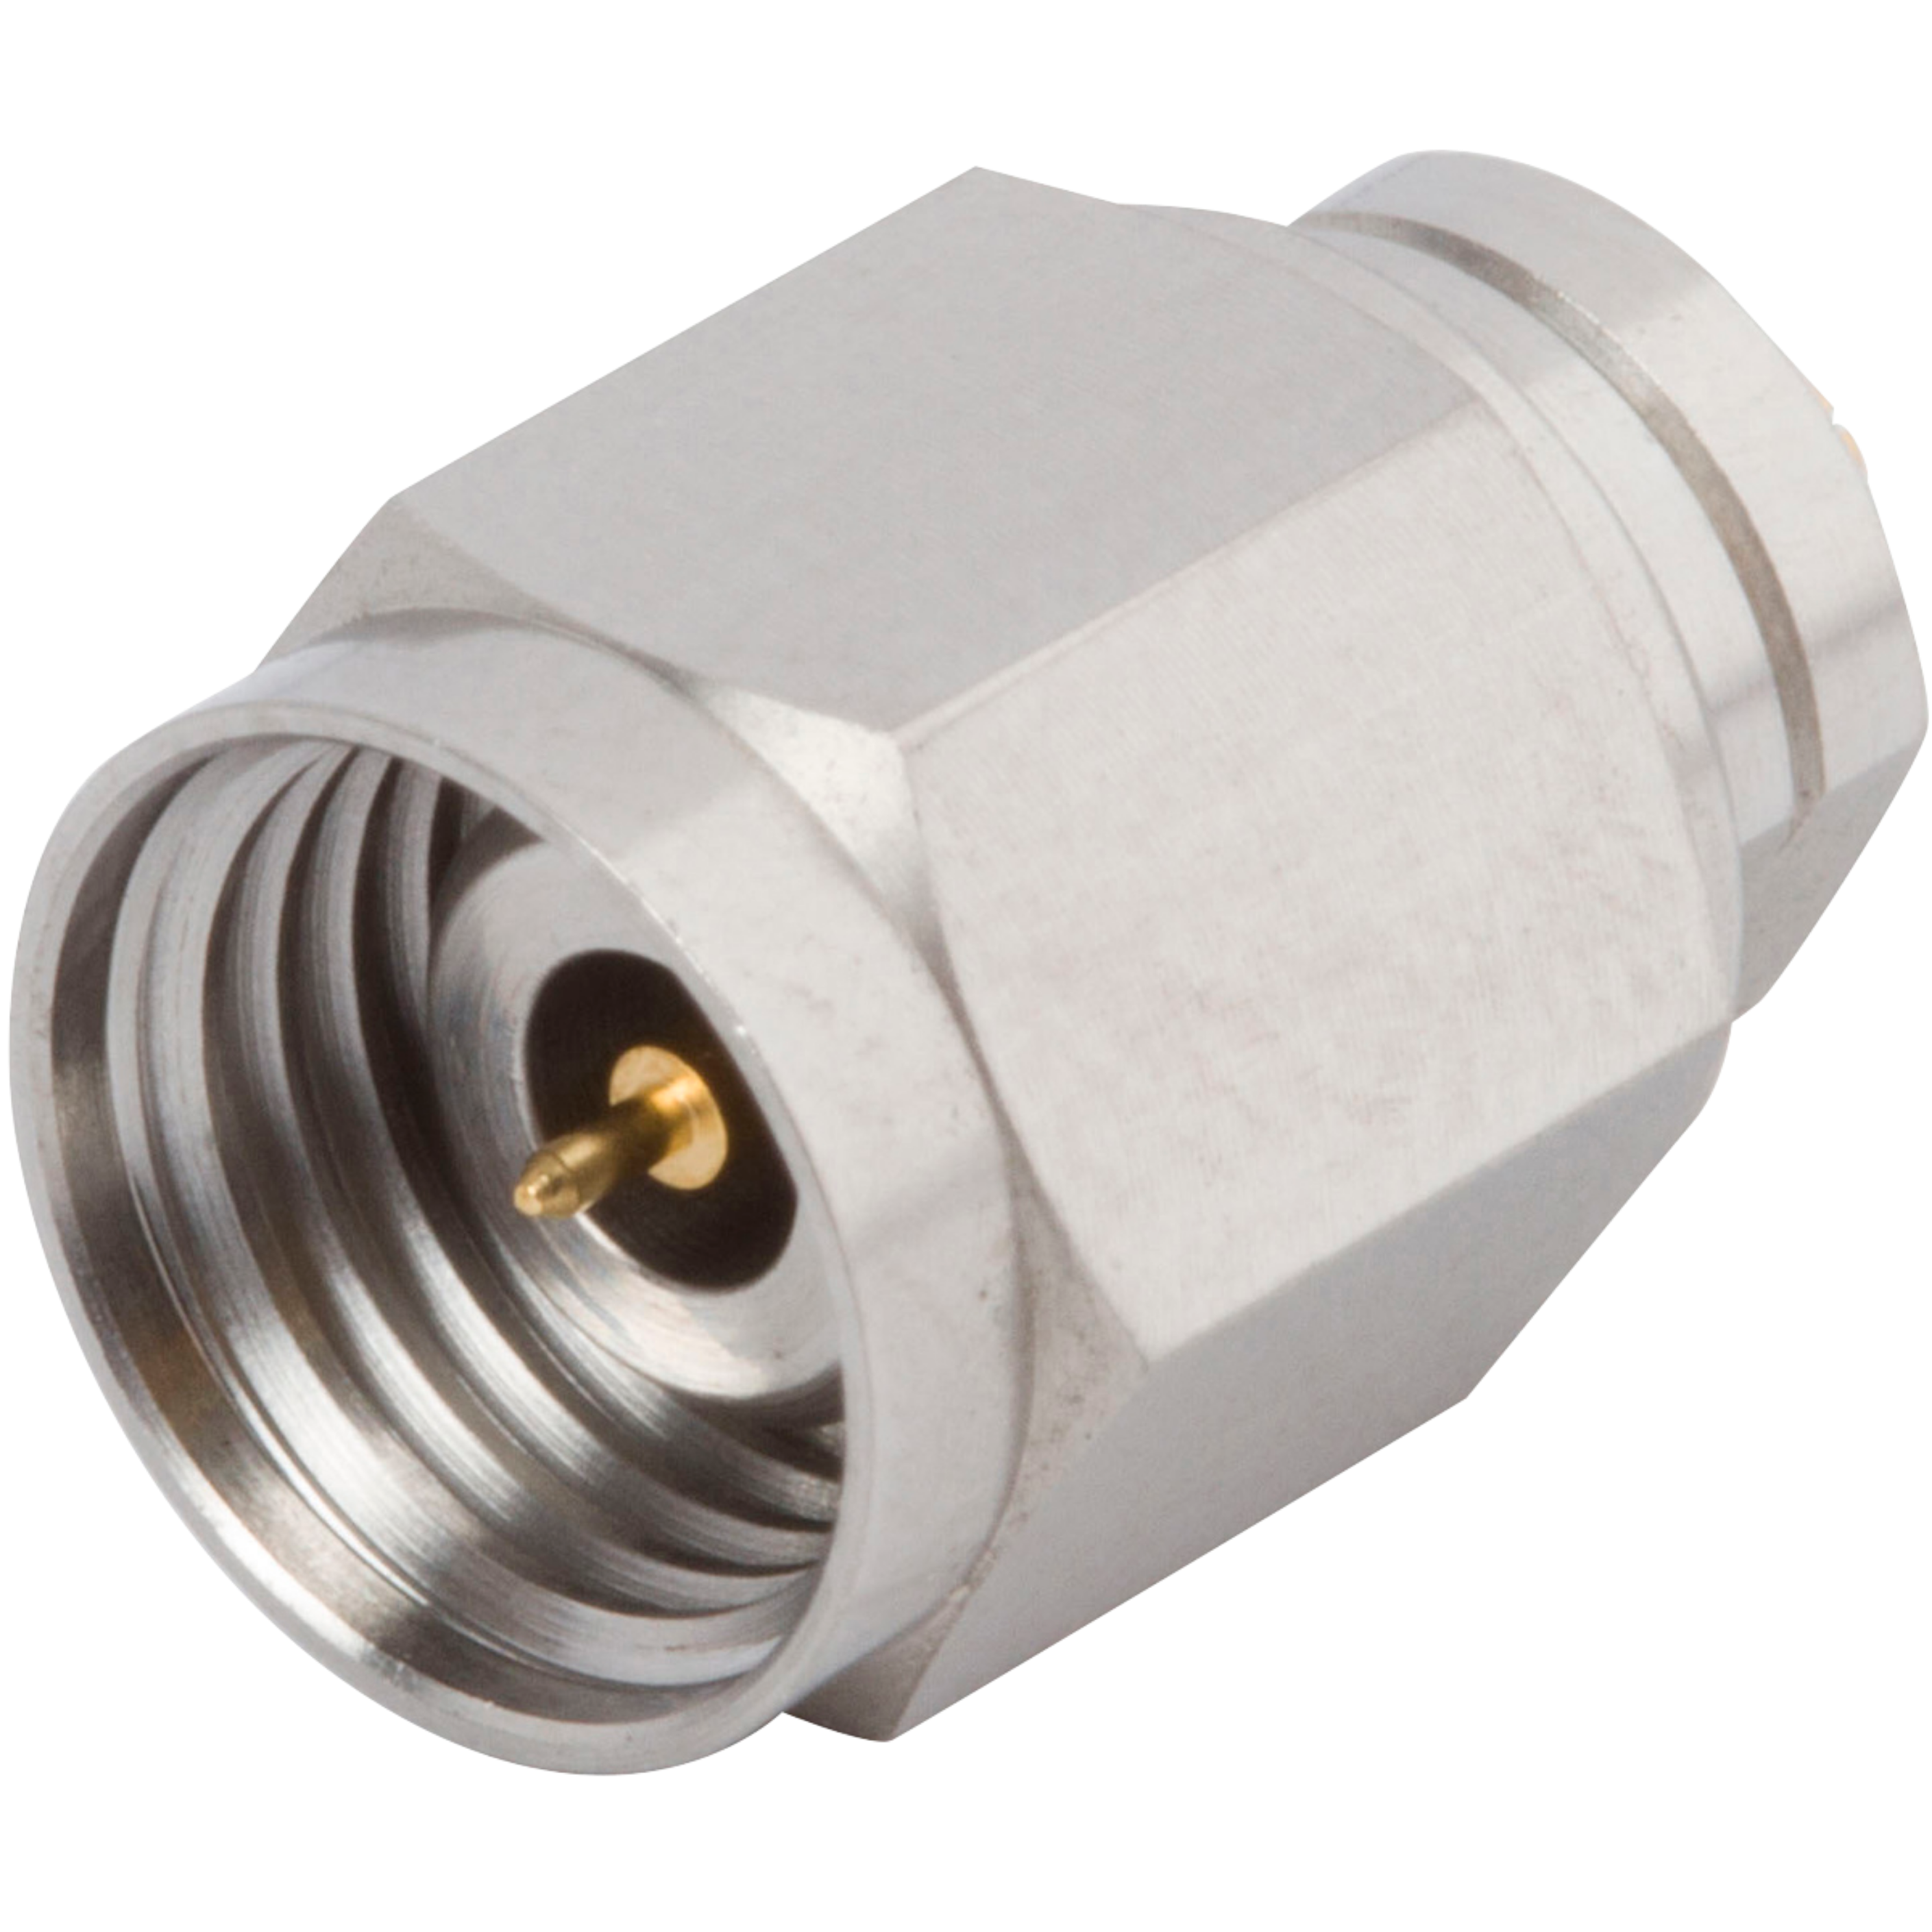 SMPS Female to 2.4mm Male Adapter, SF1116-6025